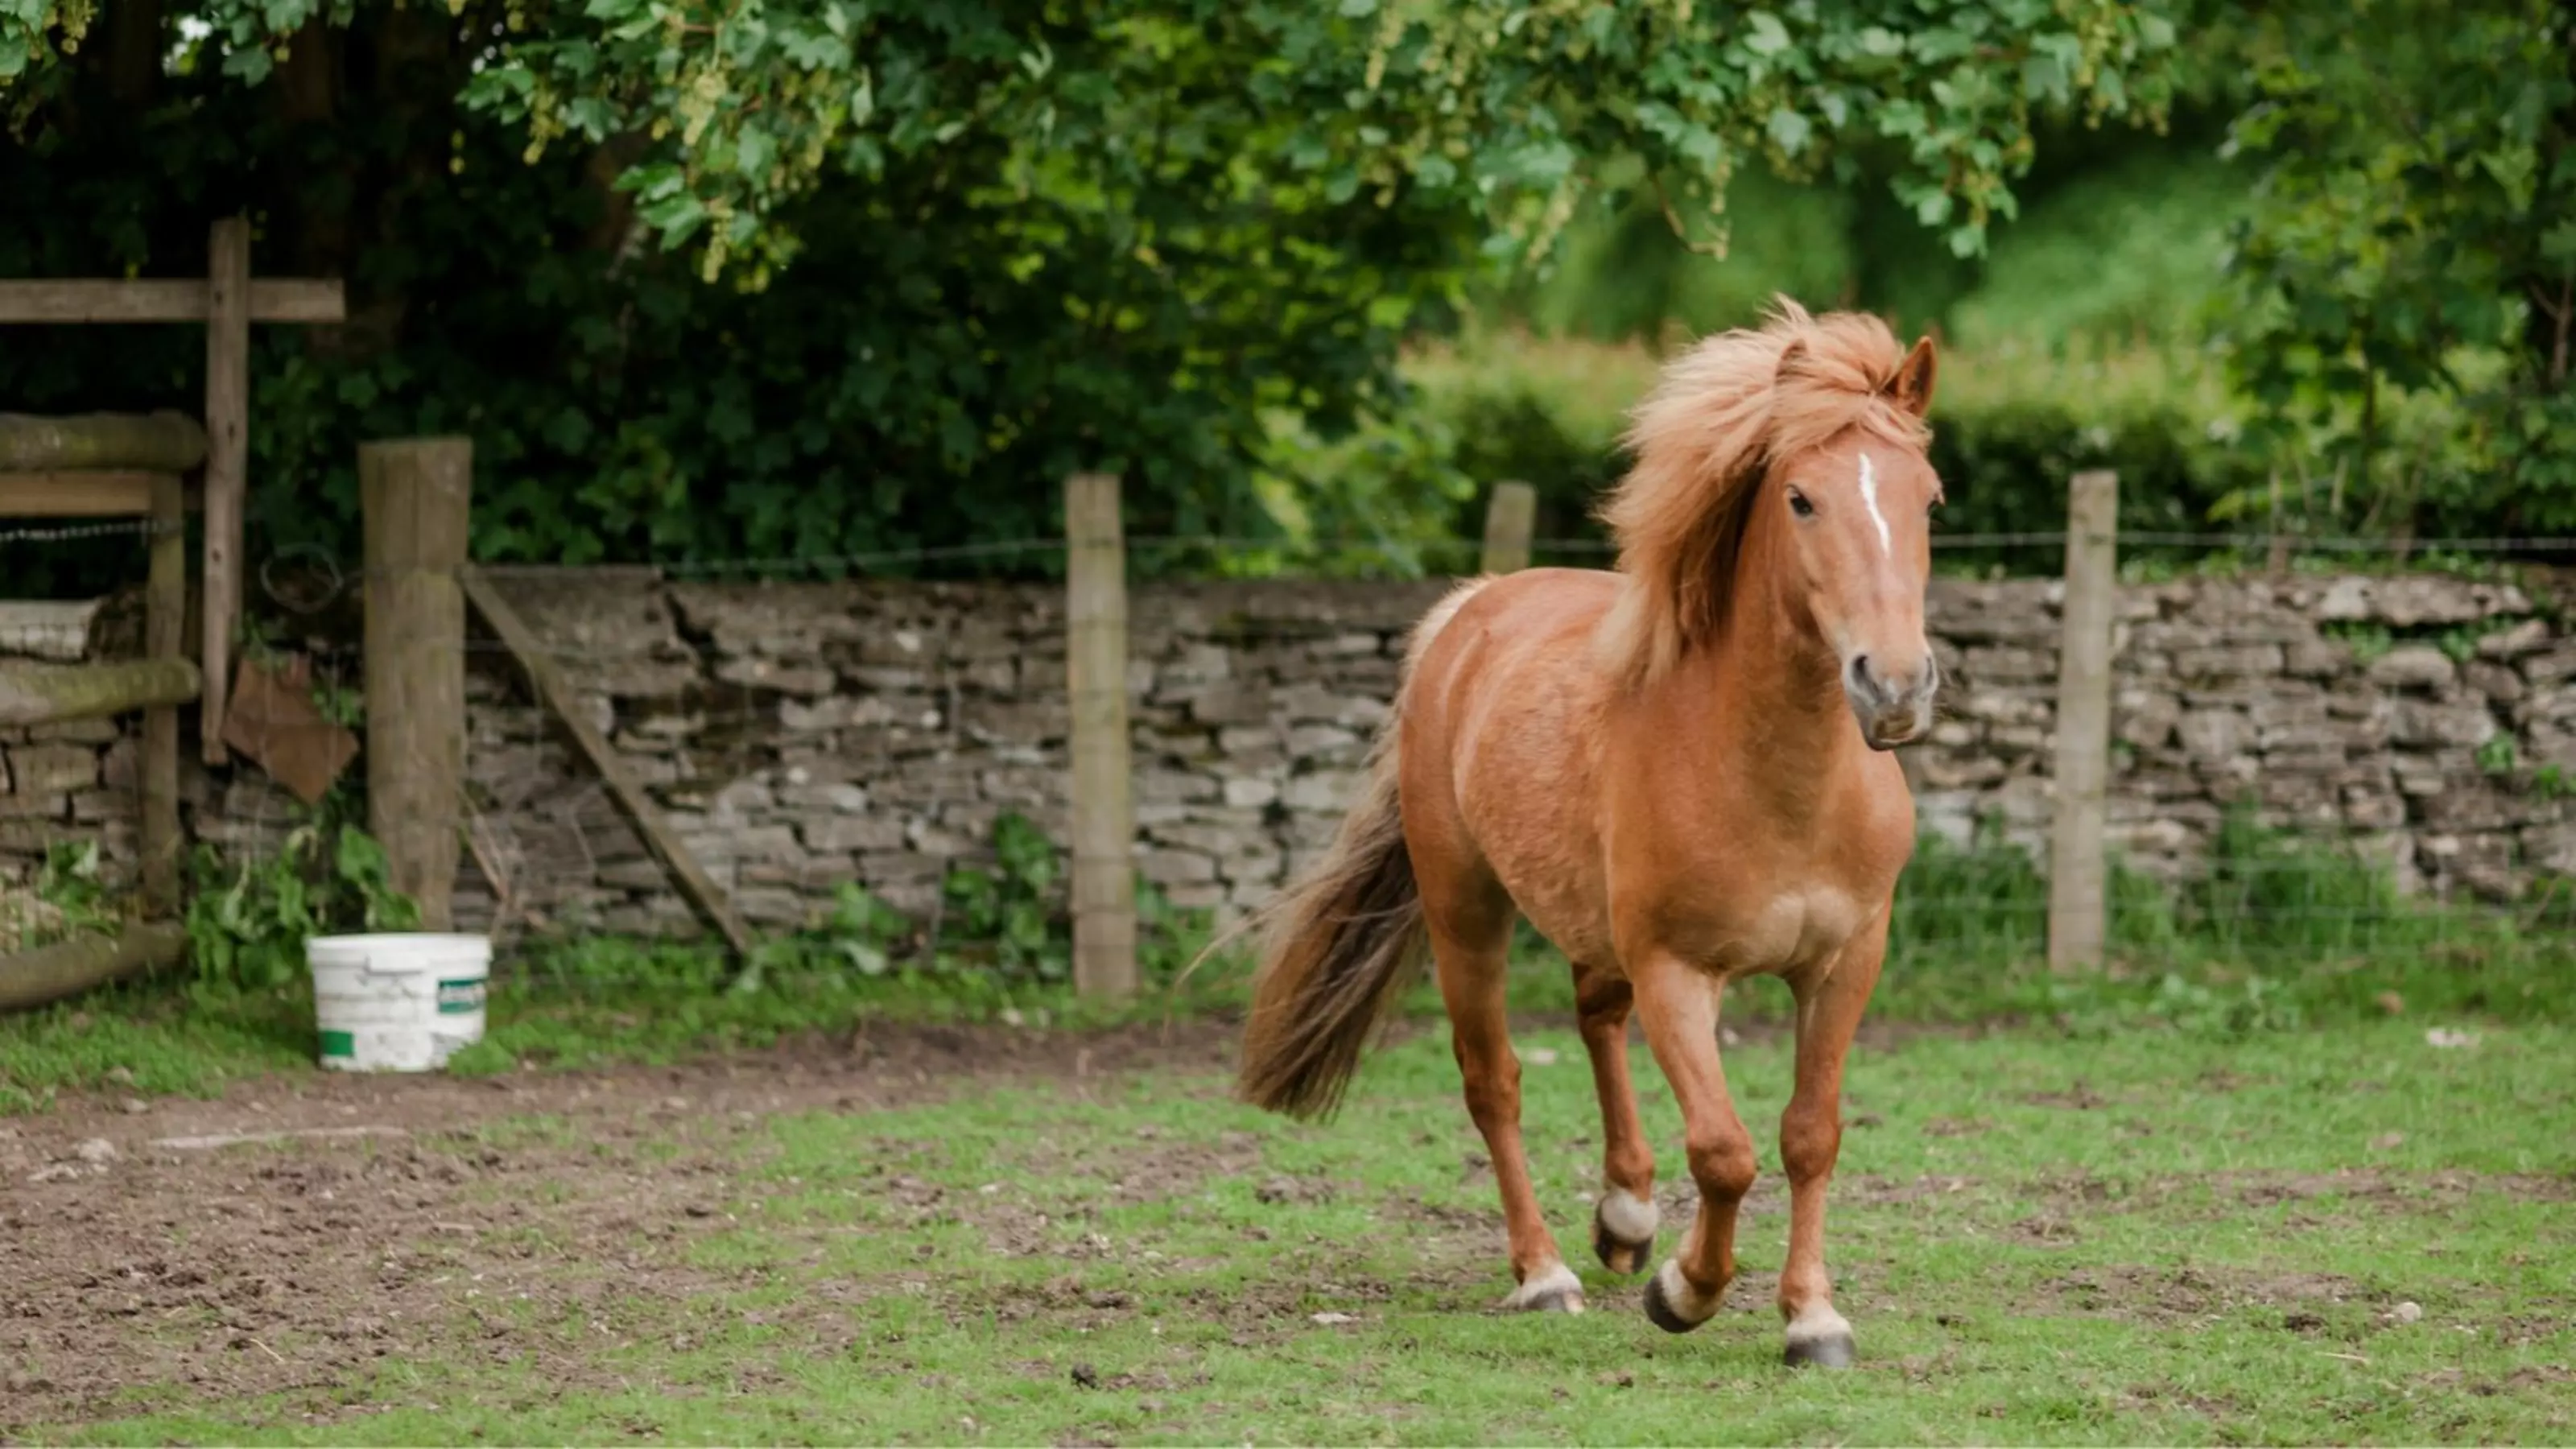 A chestnut pony enjoys exercise in their field.